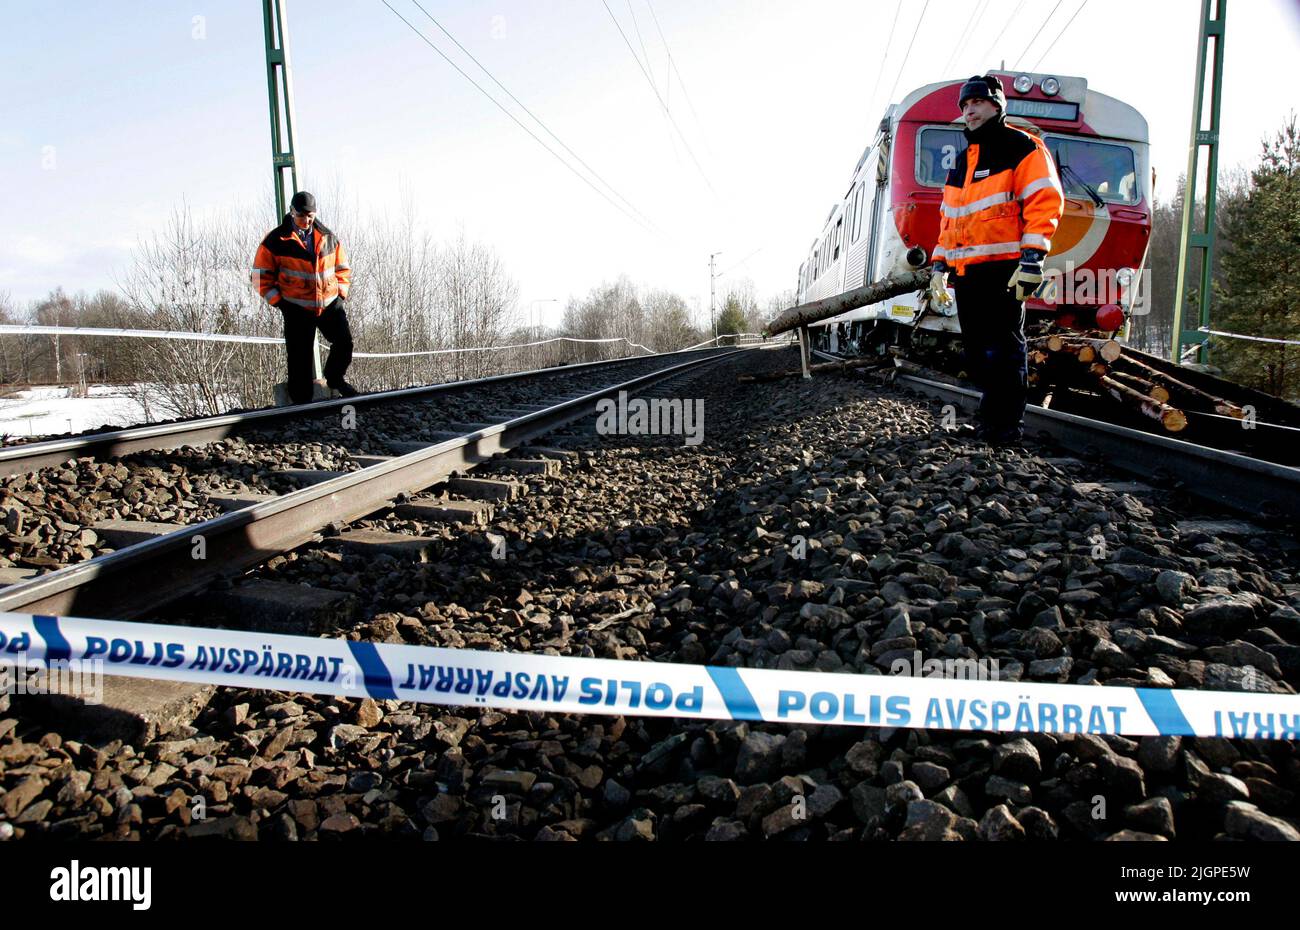 It may have been a pair of wheels on the freight train that caused Wednesday night's derailment and train accident in Linköping. This does not exclude The Swedish Accident Investigation Authority (In Swedish: Statens haverikommision), which arrived at the 600-meter-long accident site between Skäggetorp and Ryd in Linköping, Sweden, on Thursday morning. The picture shows a passenger train that was damaged in the incident. Stock Photo